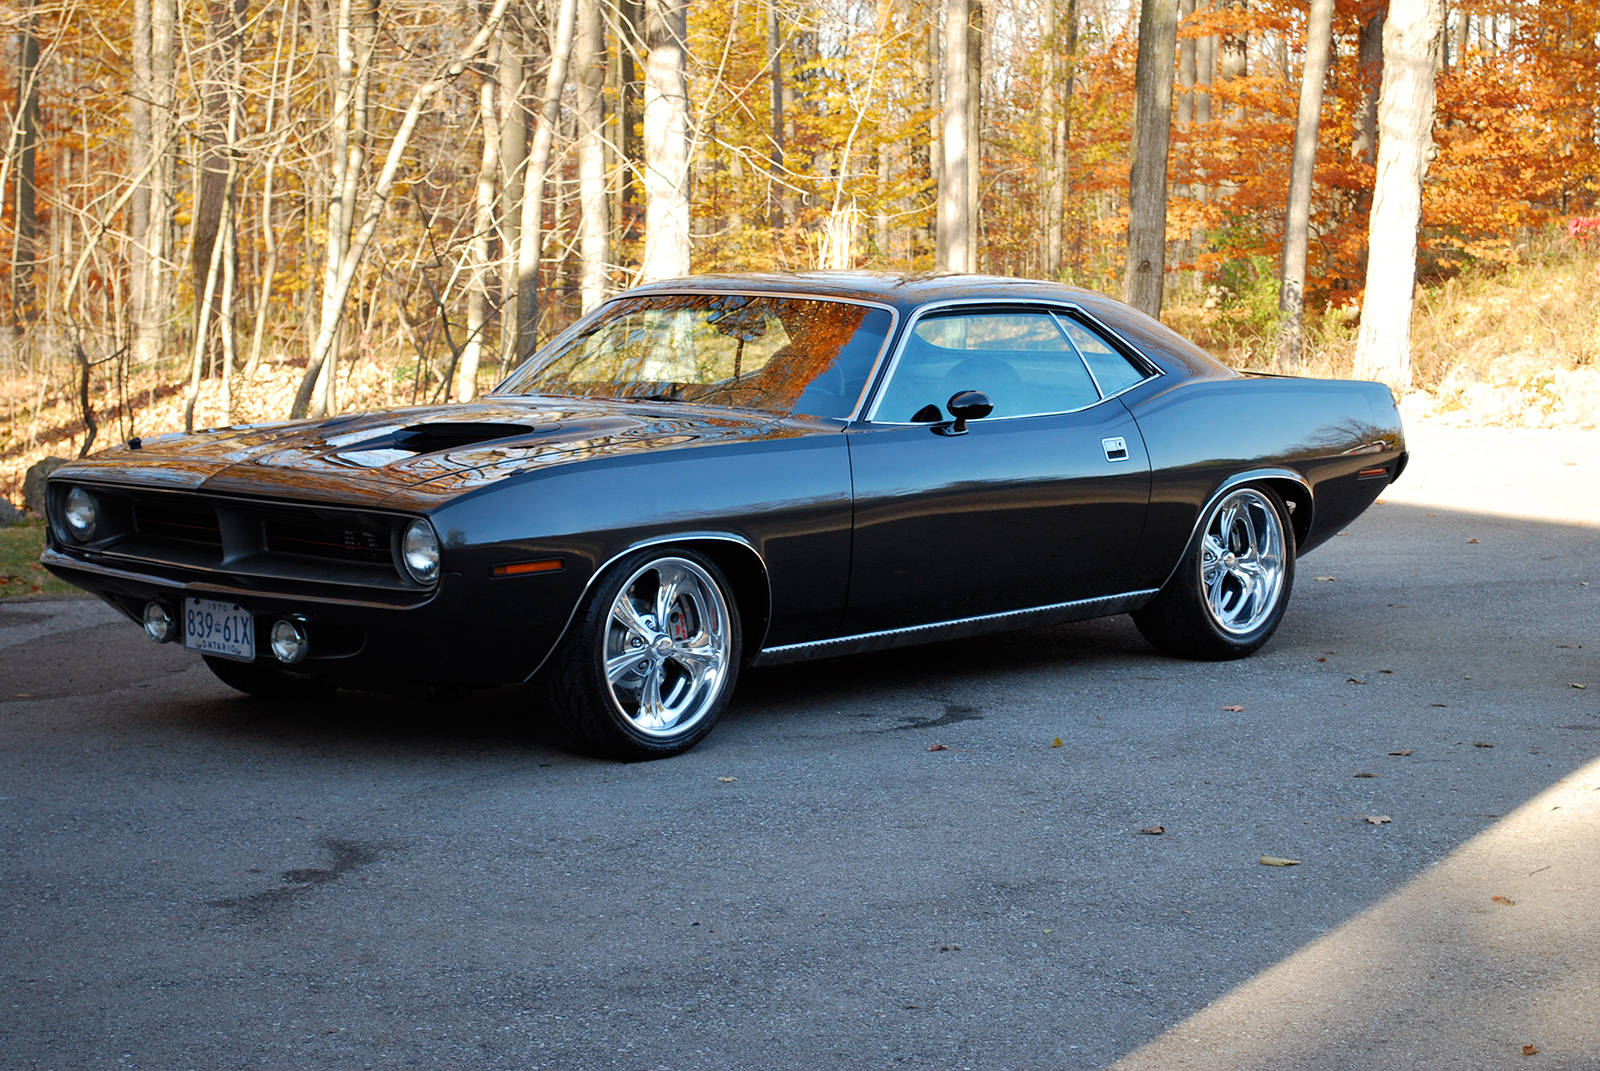 Black 1974 Plymouth Barracuda In Autumn Background